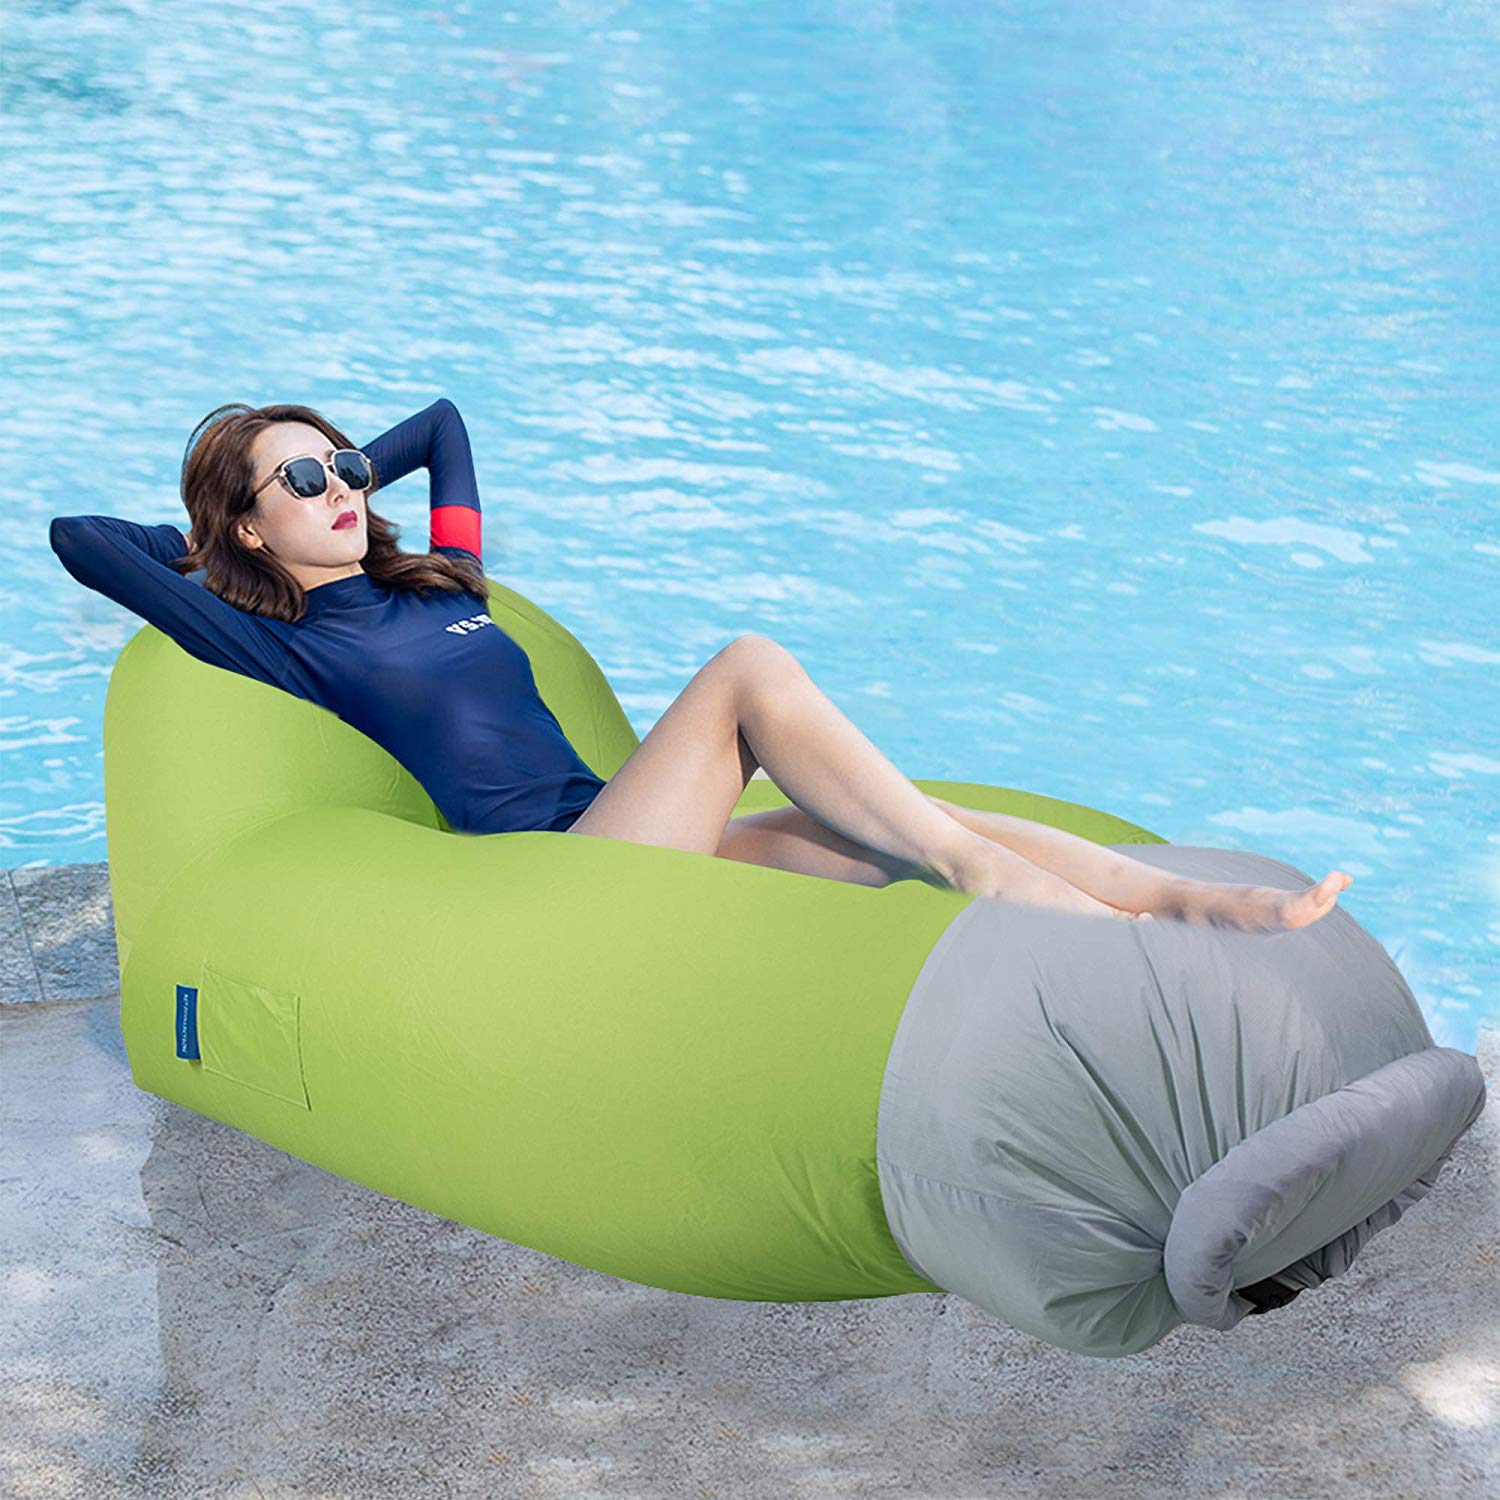 Bosonshop Portable Outdoor & Indoor Inflatable Air Lounger Sofa with Handy Storage Bag for Travelling